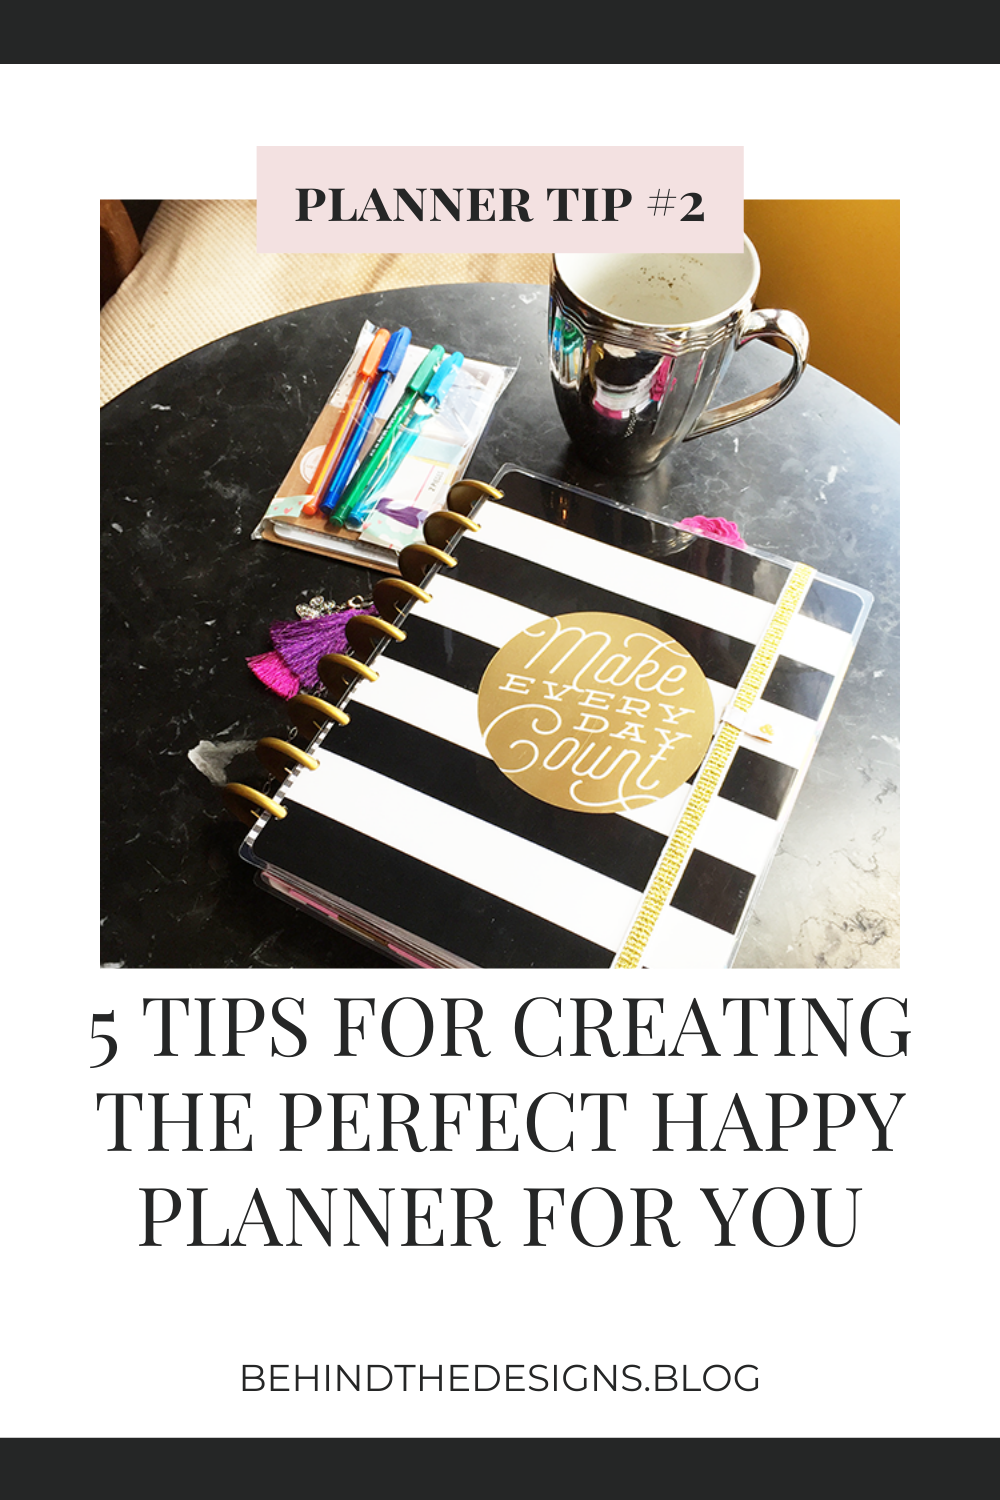 5 Tips for Creating the Perfect Happy Planner For You